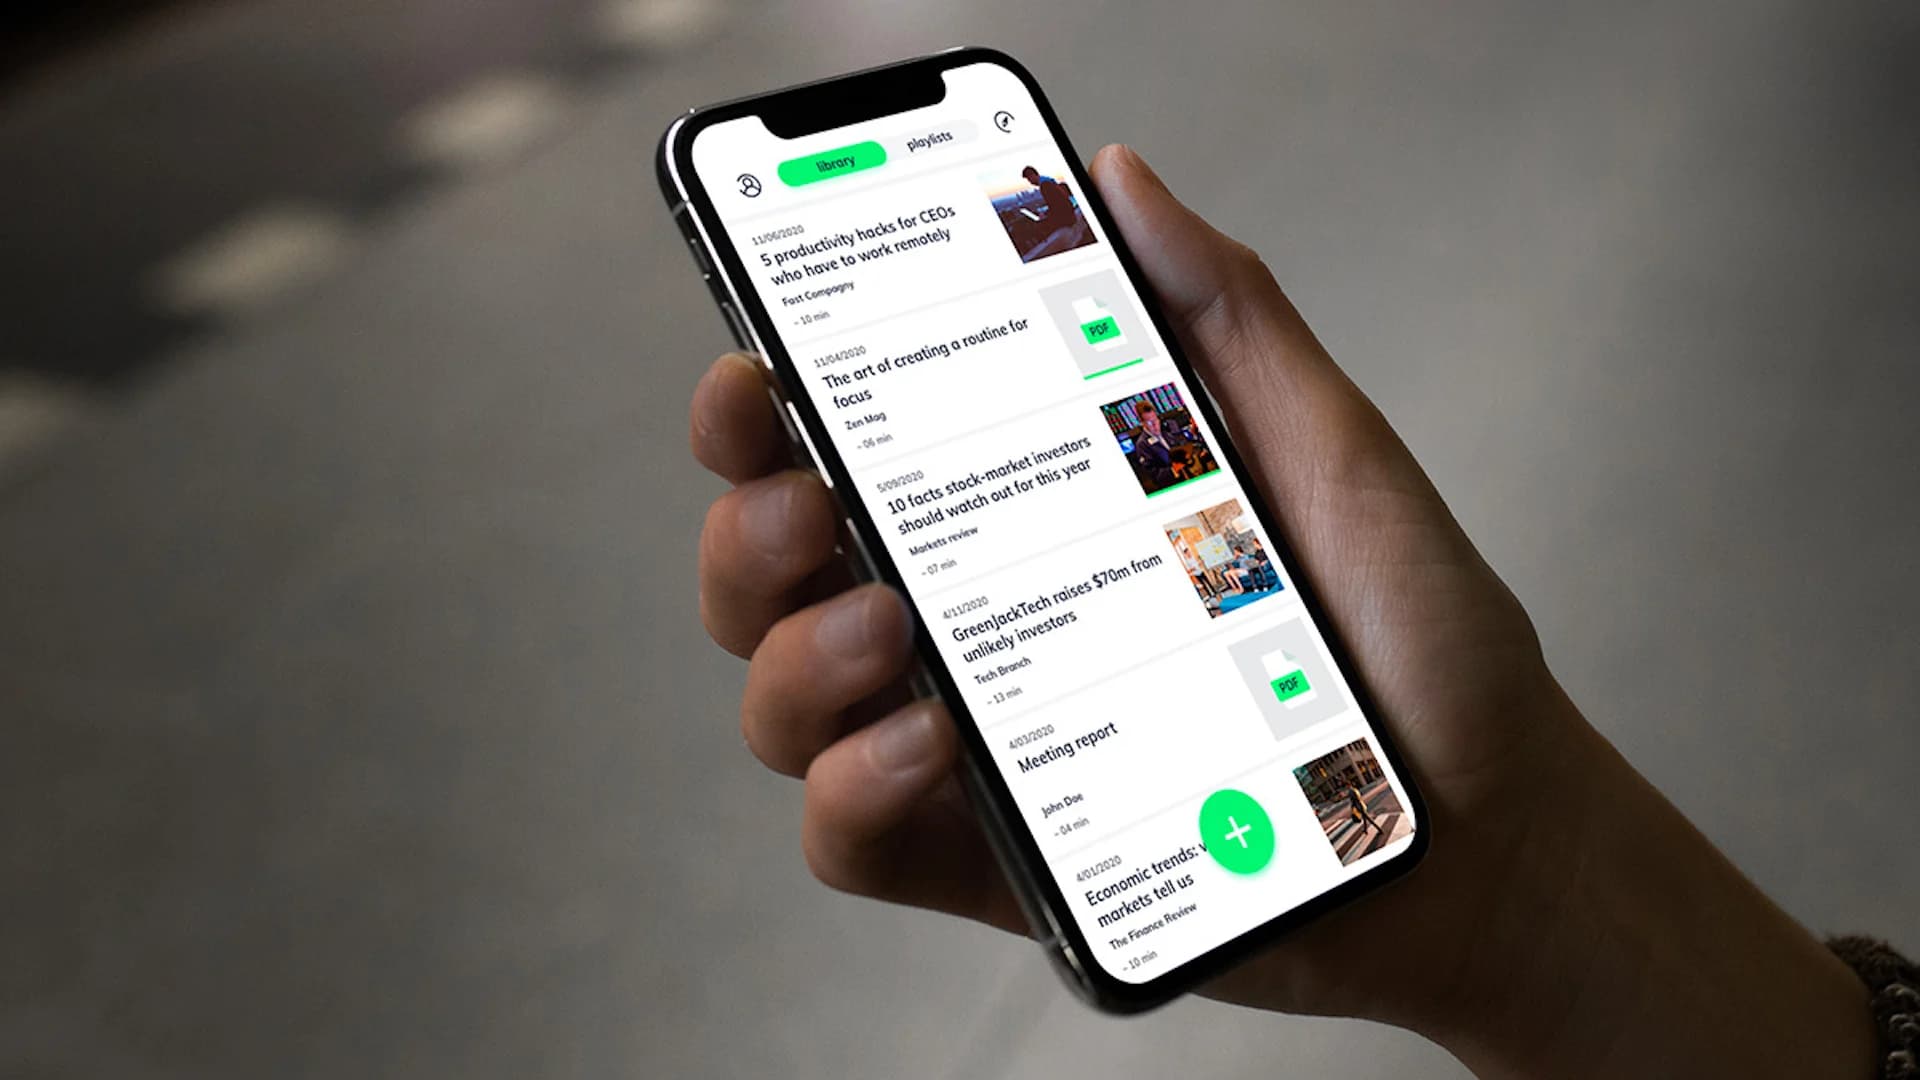 This on-sale app will convert your news into a podcast